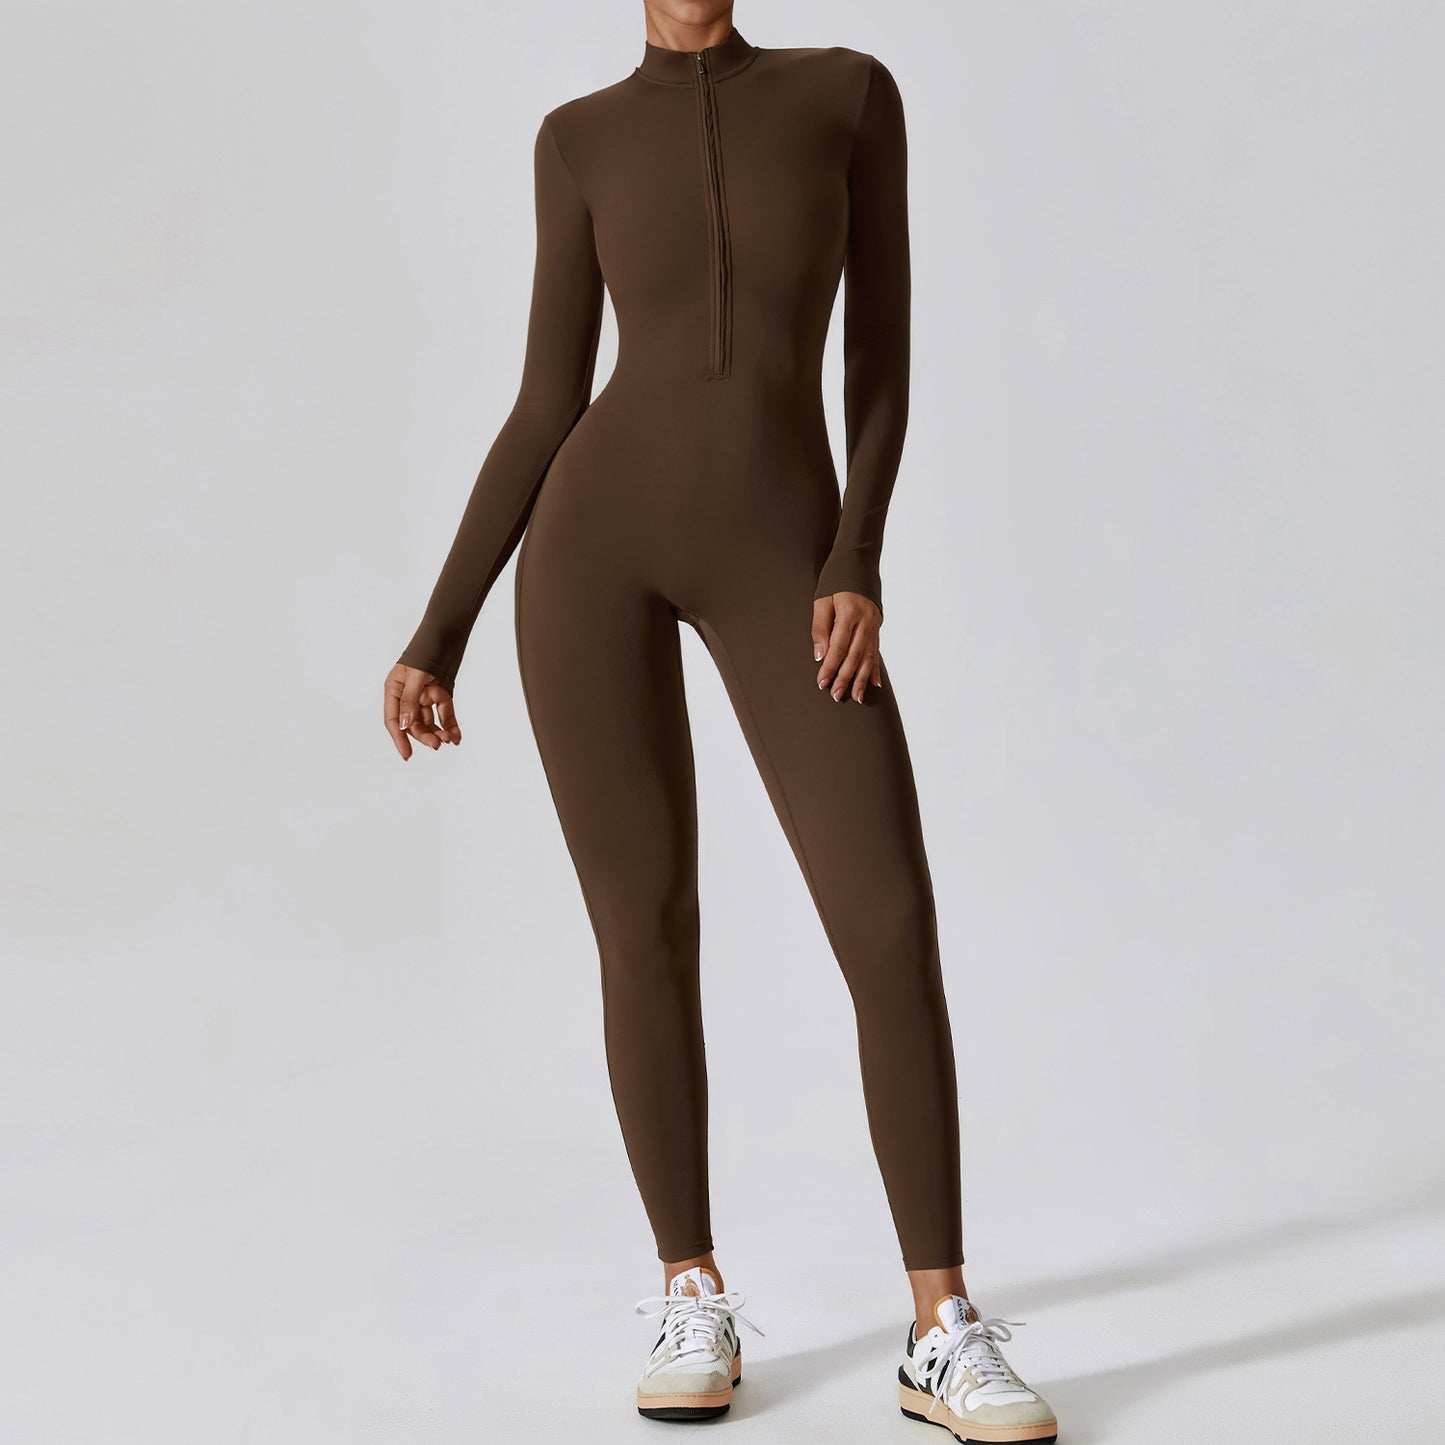 Zipper Nude Feel Long Sleeve Yoga Jumpsuit High Strength Fitness One Piece Tights